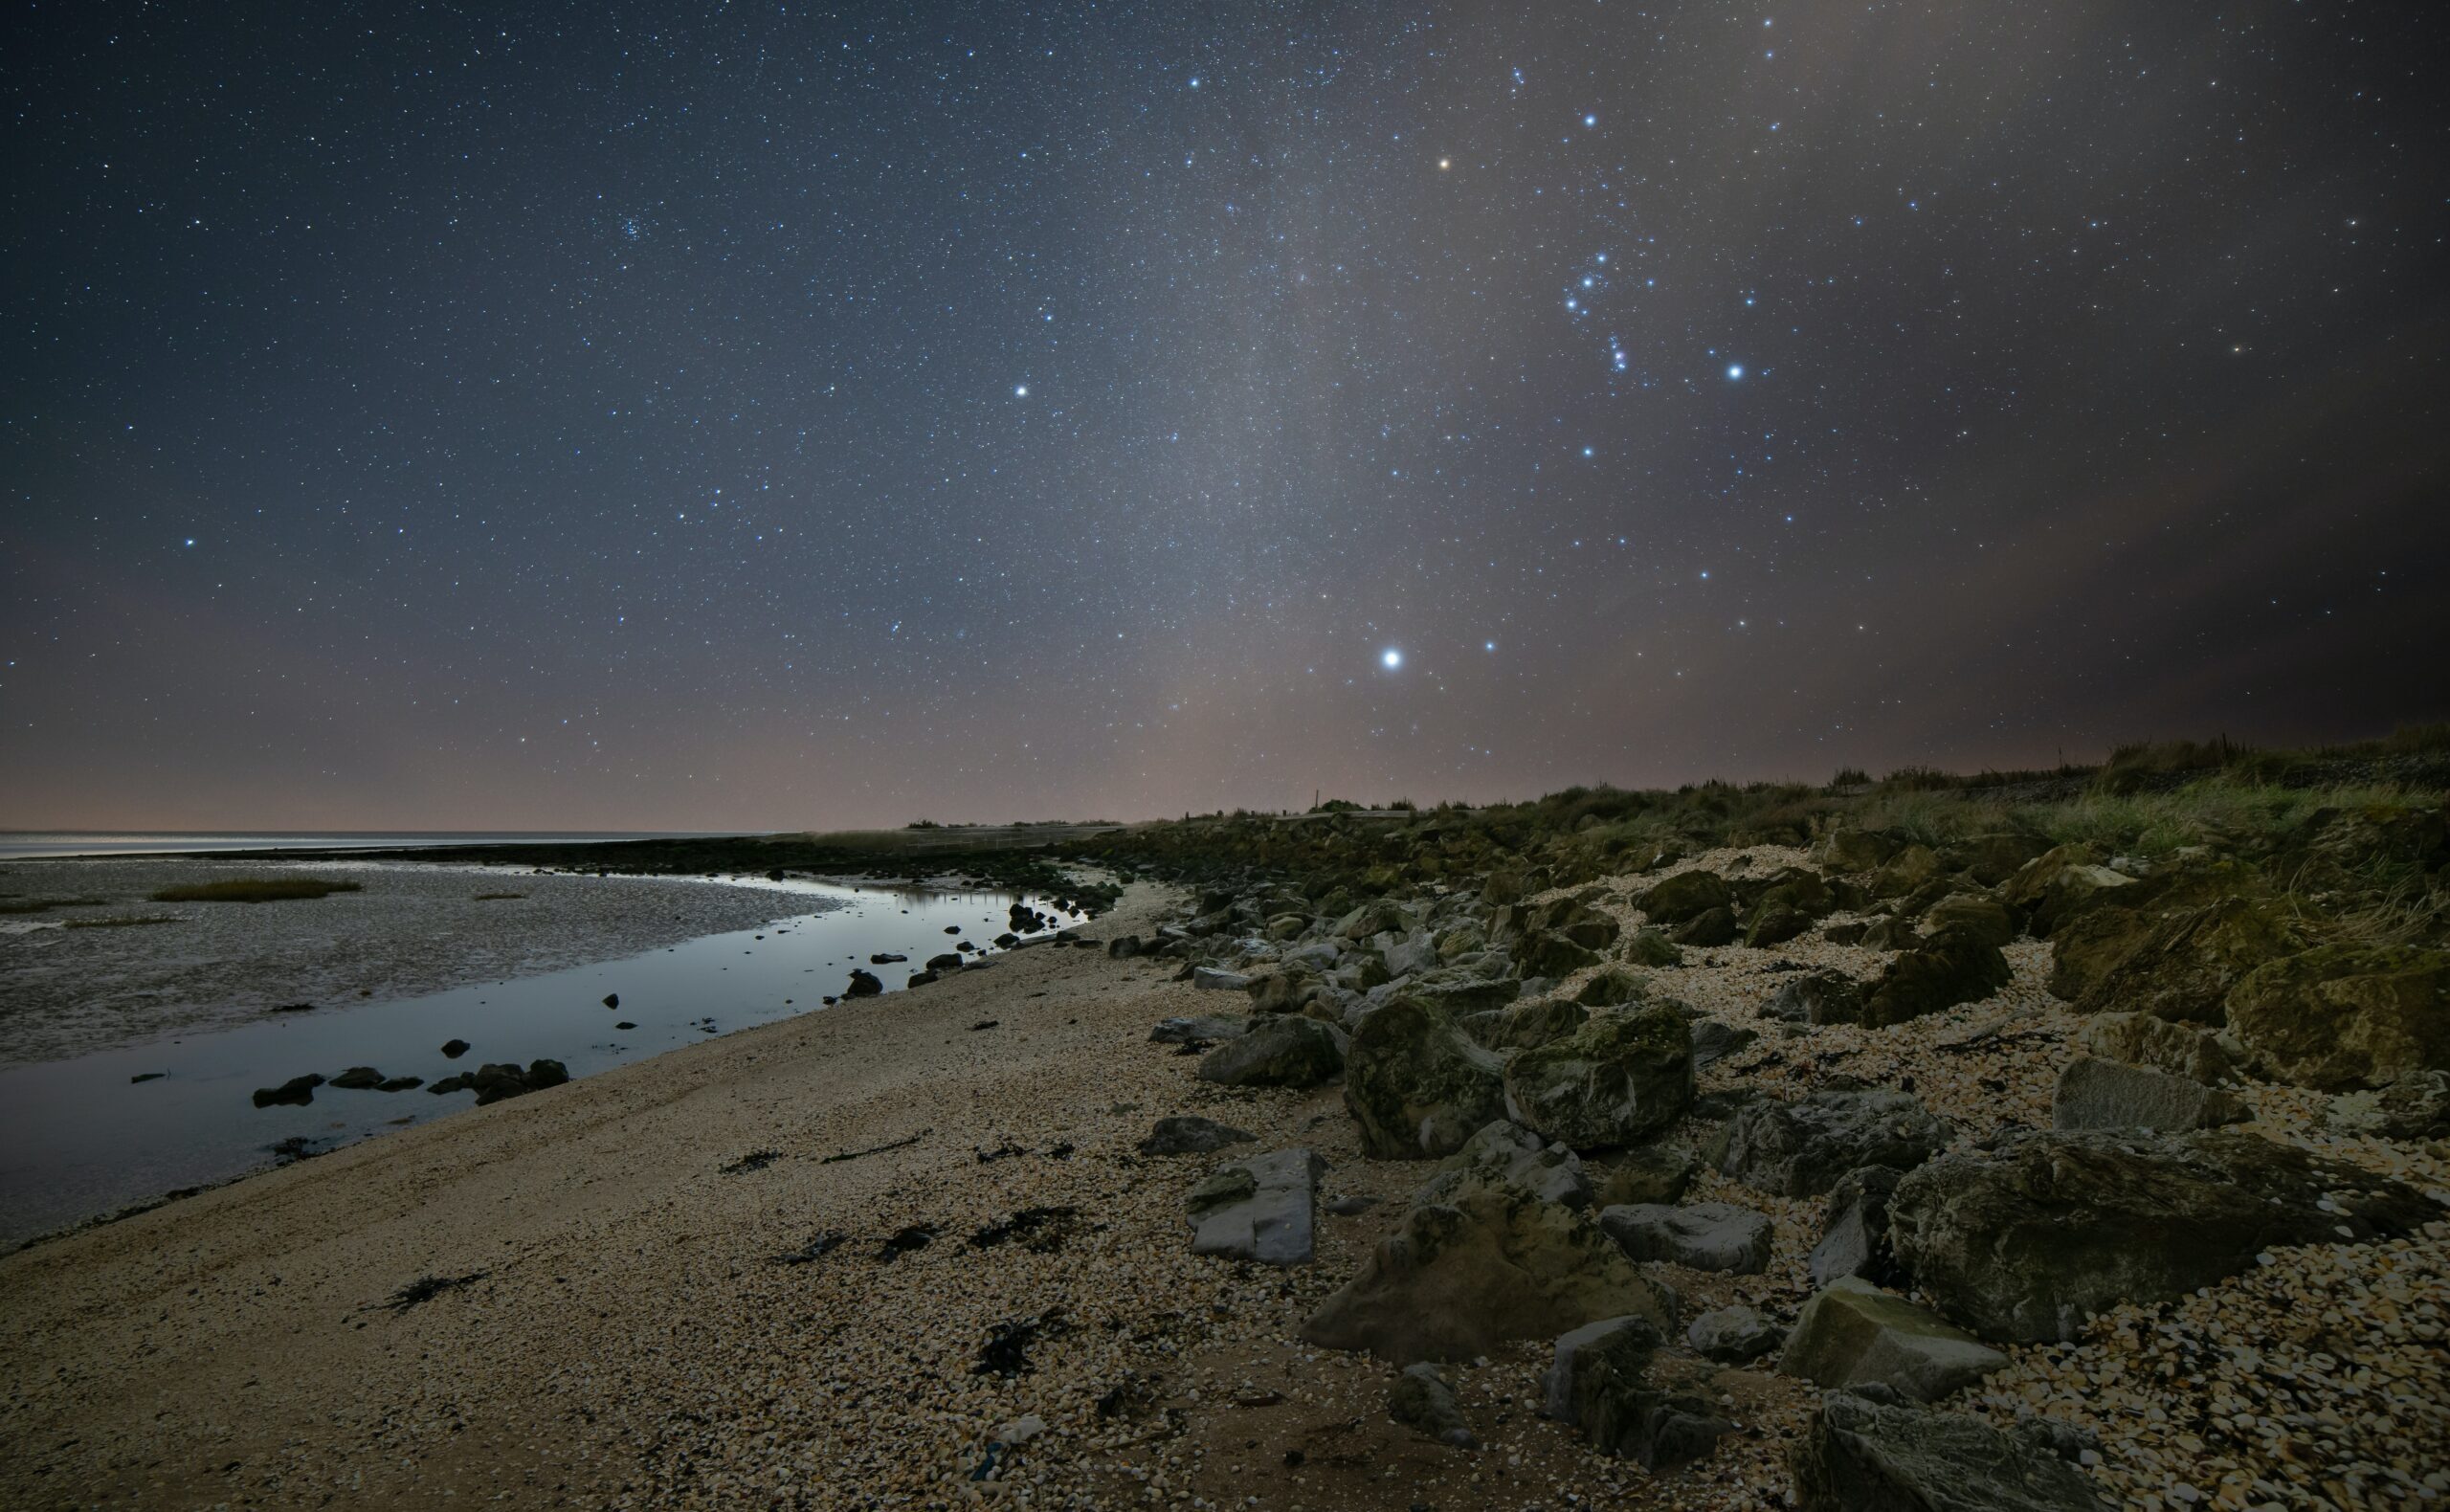 Orion visible over a beach in Kent